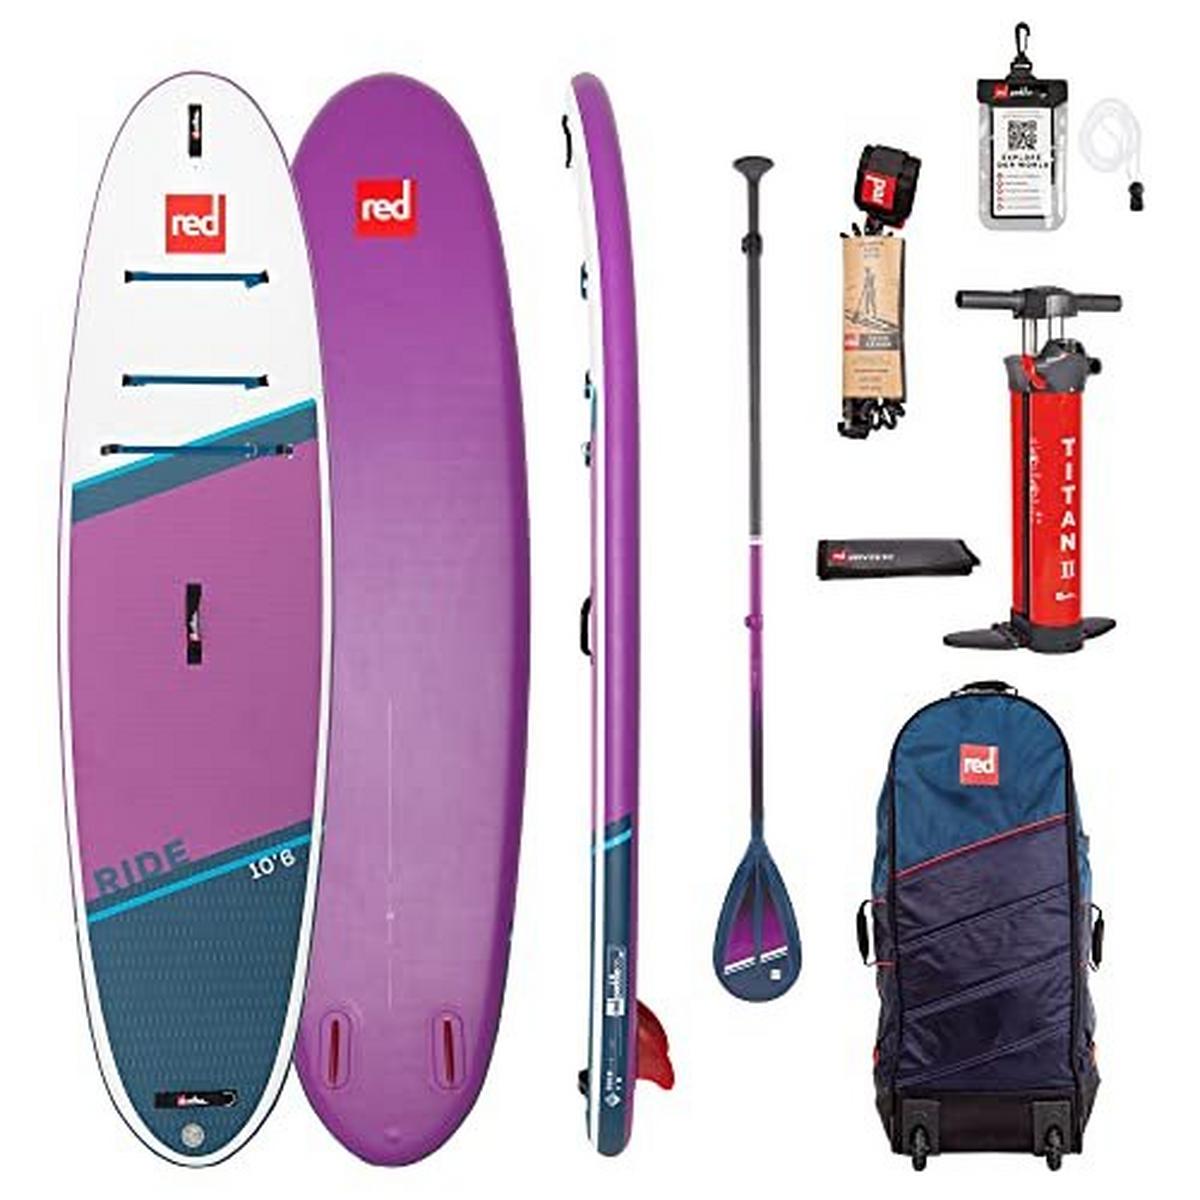 Red Paddle Ride 10ft 6in Inflatable Hybrid Tough SUP Package - Purple